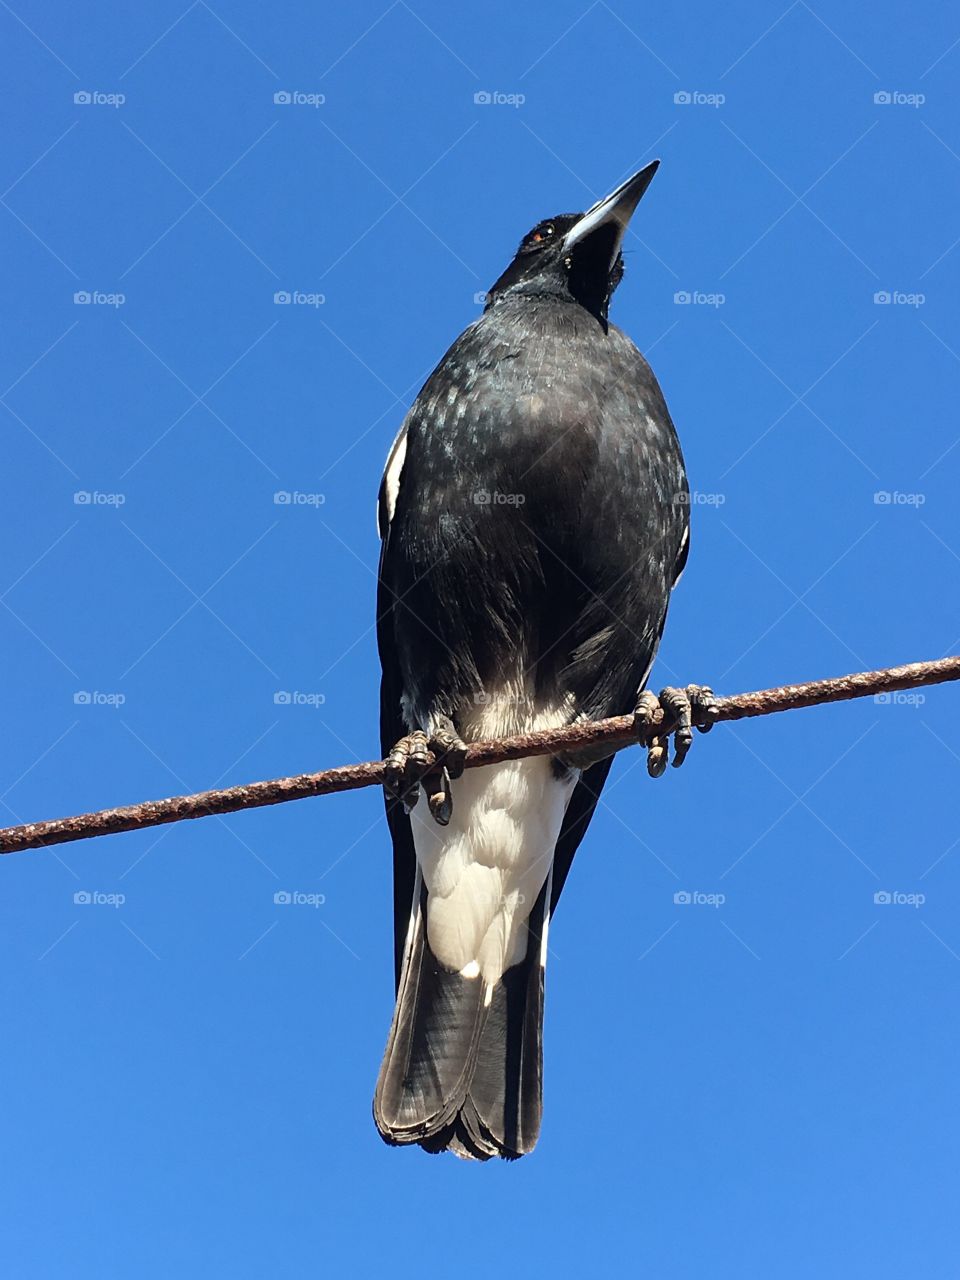 Full head to tail view wild magpie set against a bright clear vivid blue sky closeup 